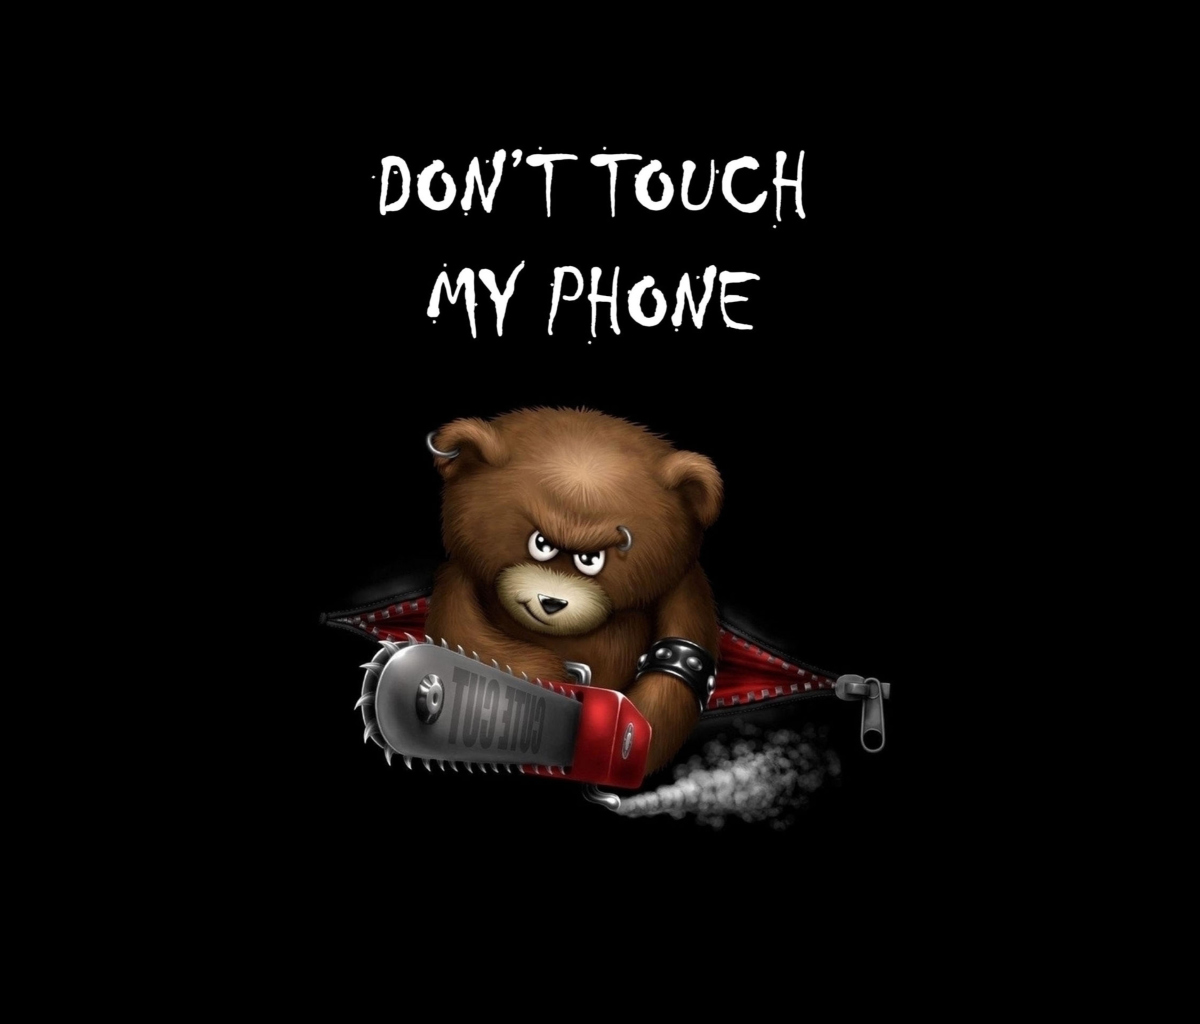 Обои Dont Touch My Phone 1200x1024